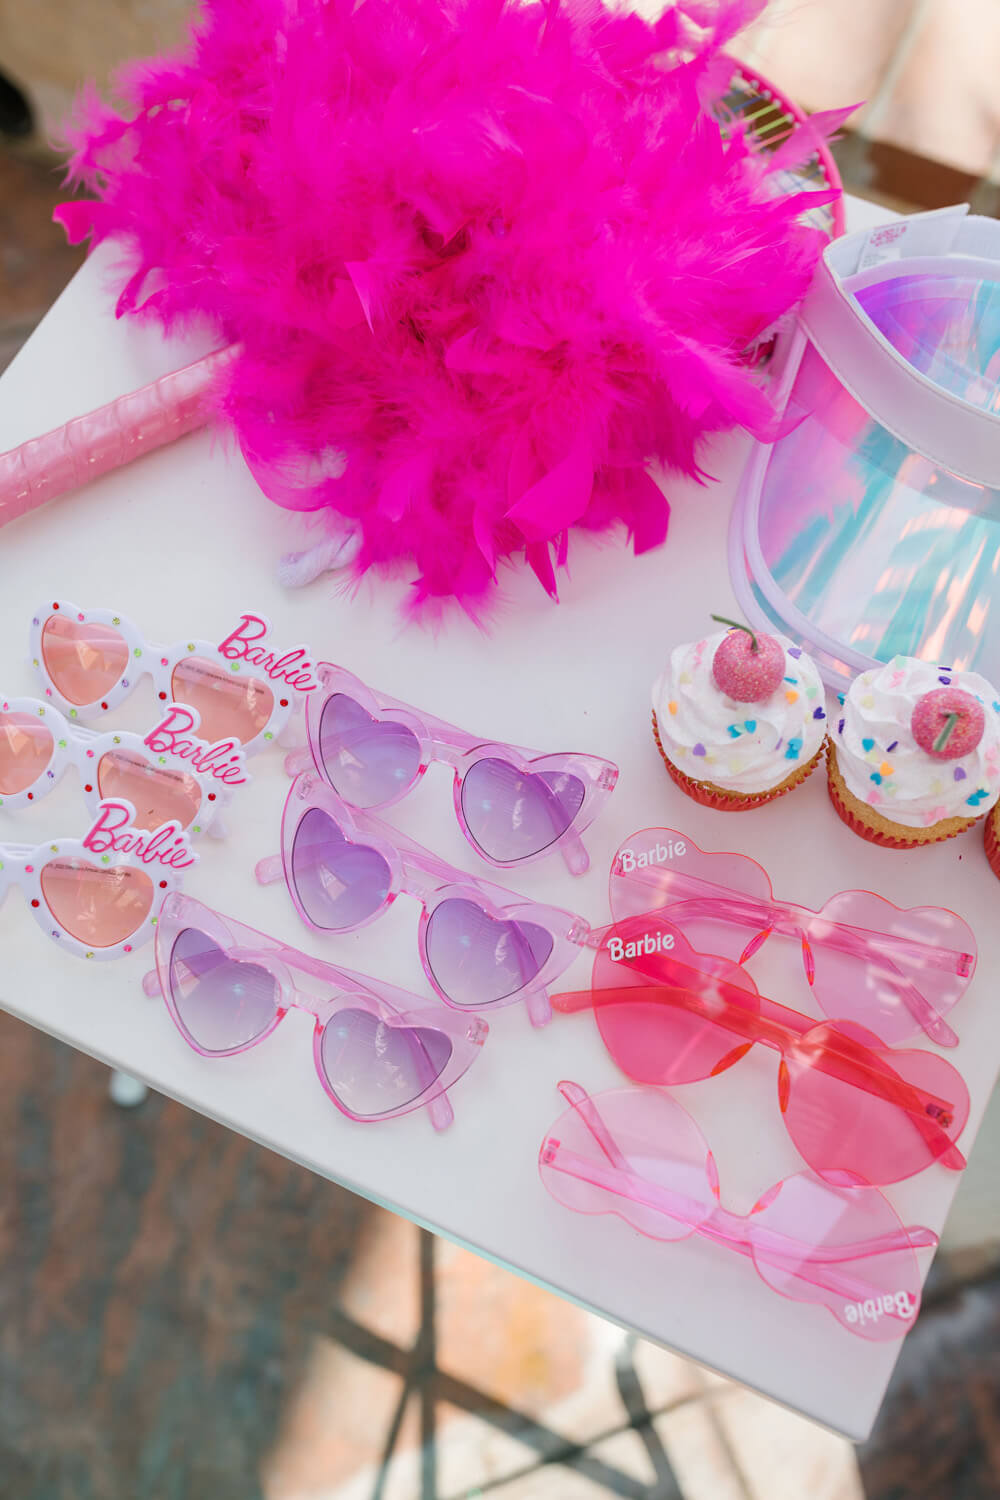 Barbie birthday party favors sunglasses